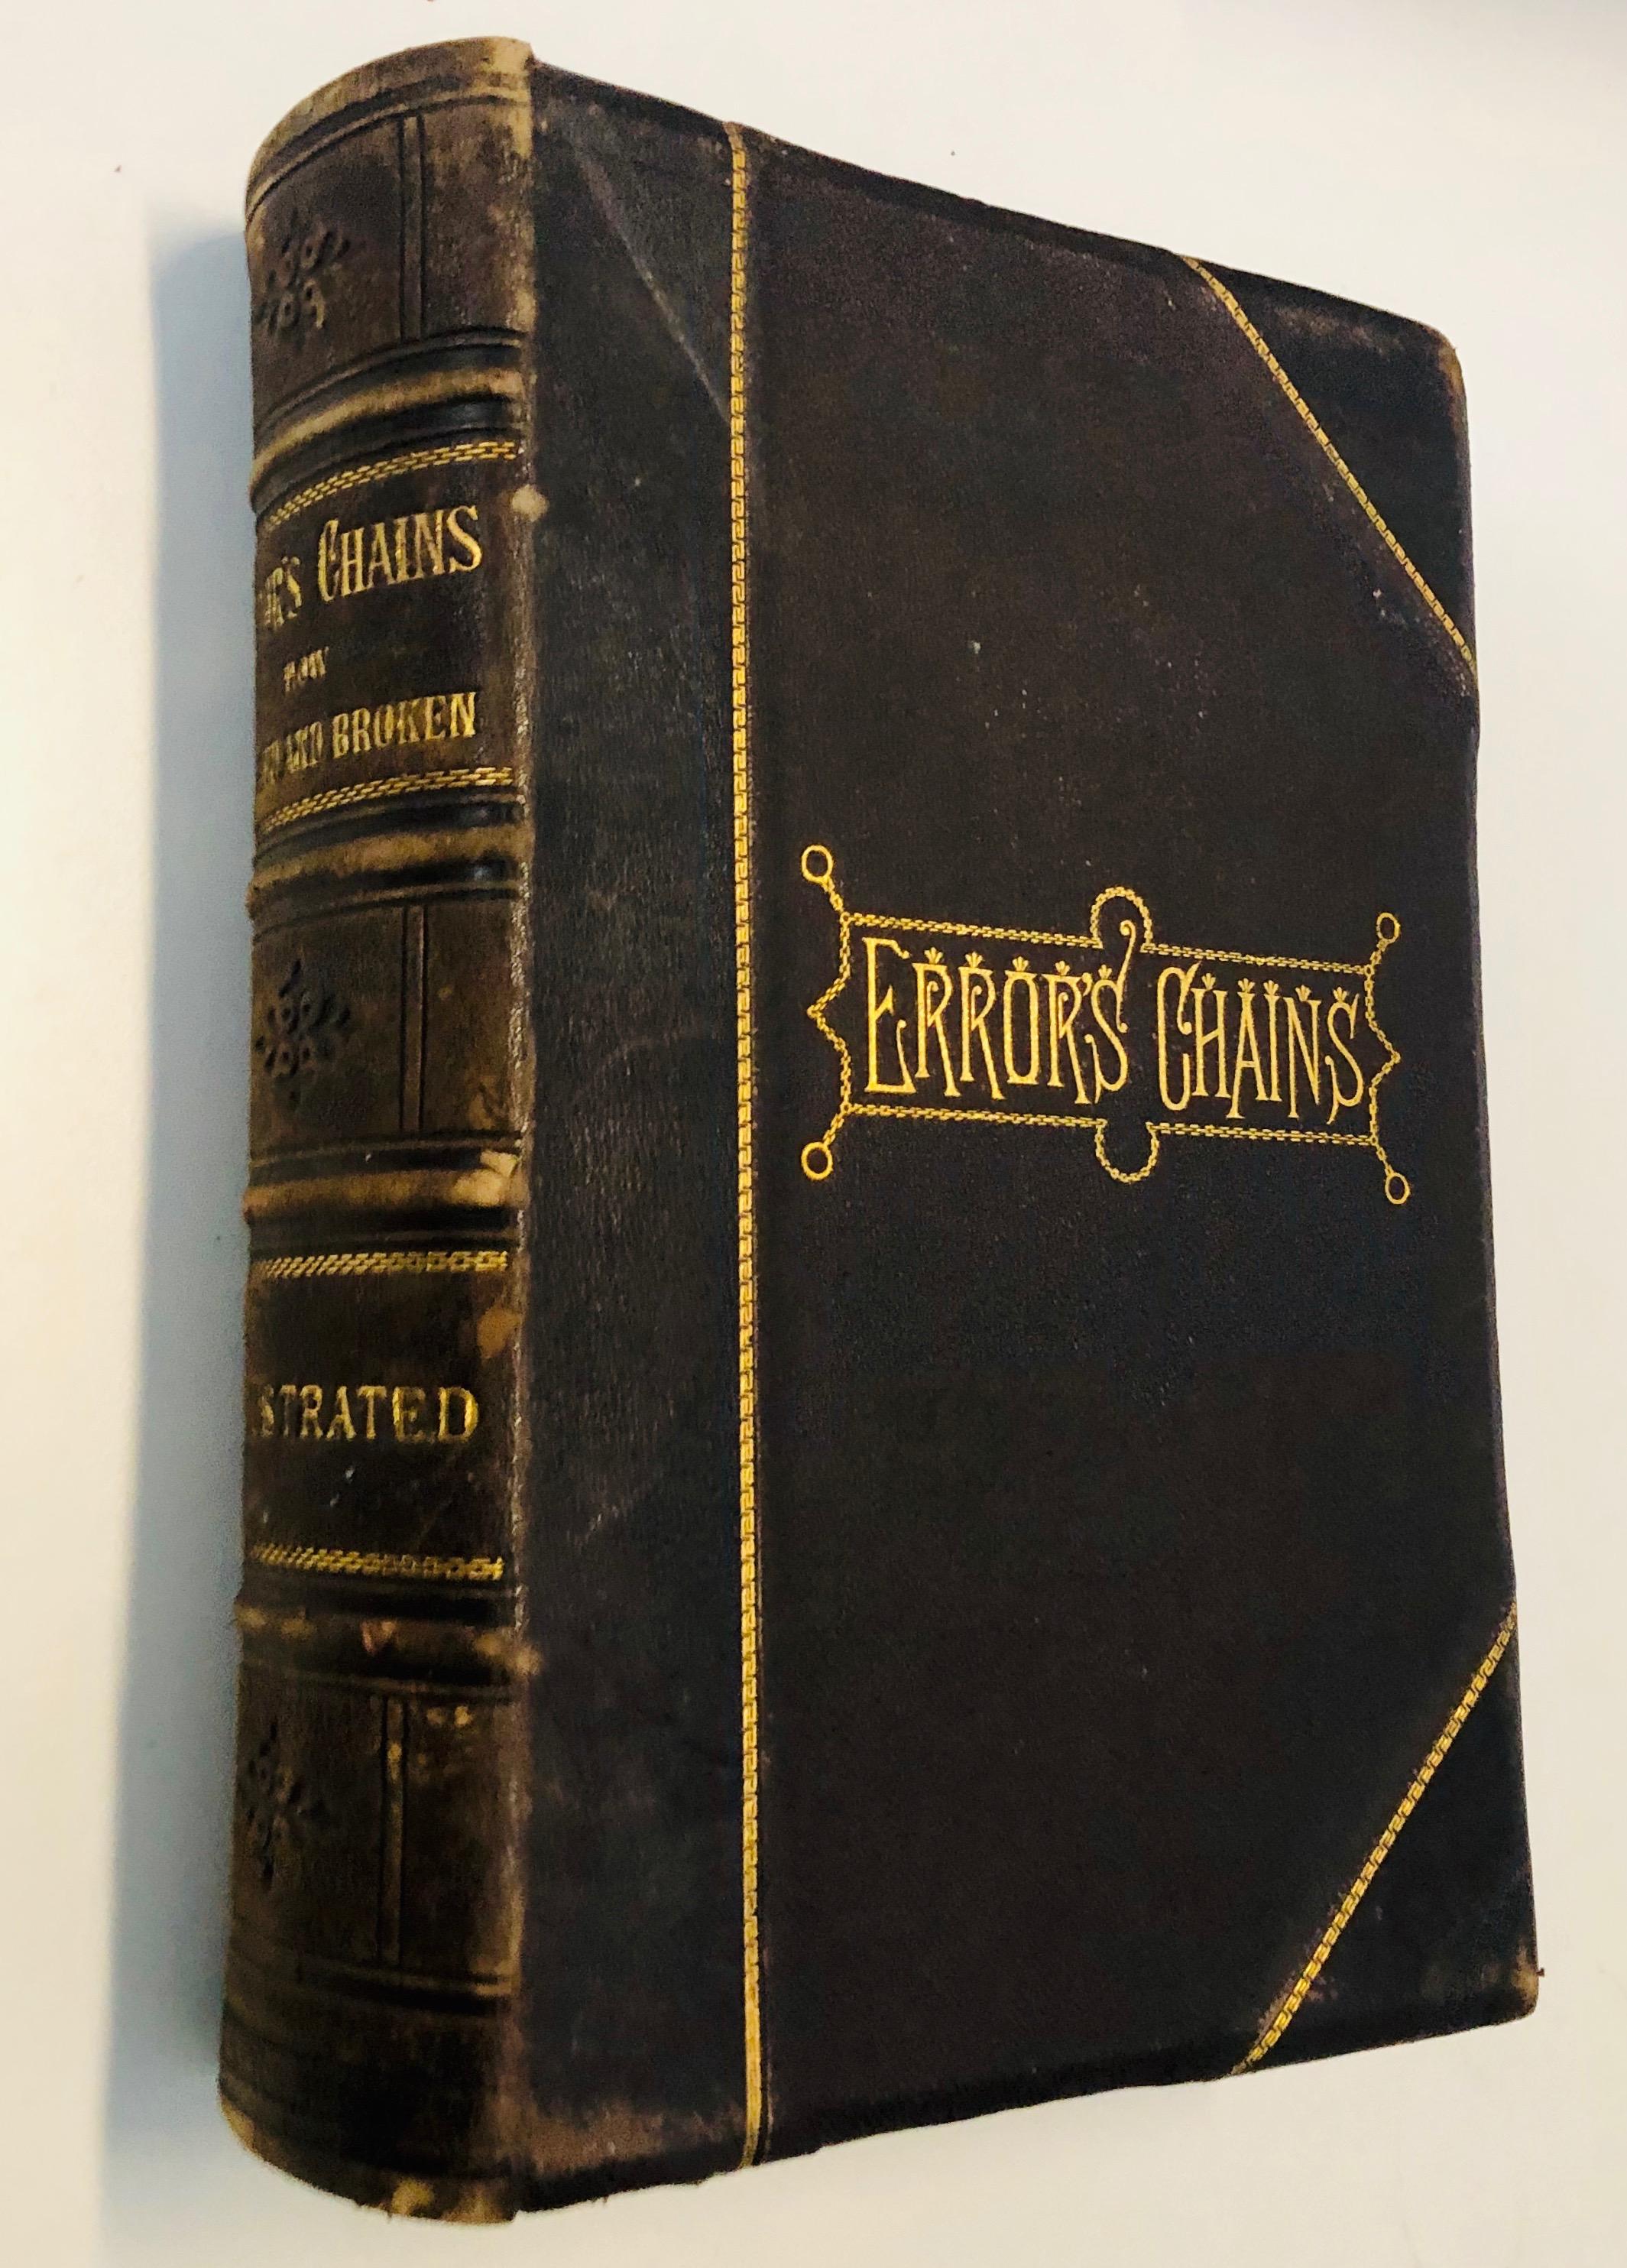 ERROR'S CHAINS: How Forged and Broken by Frank S. Dobbins (1883)